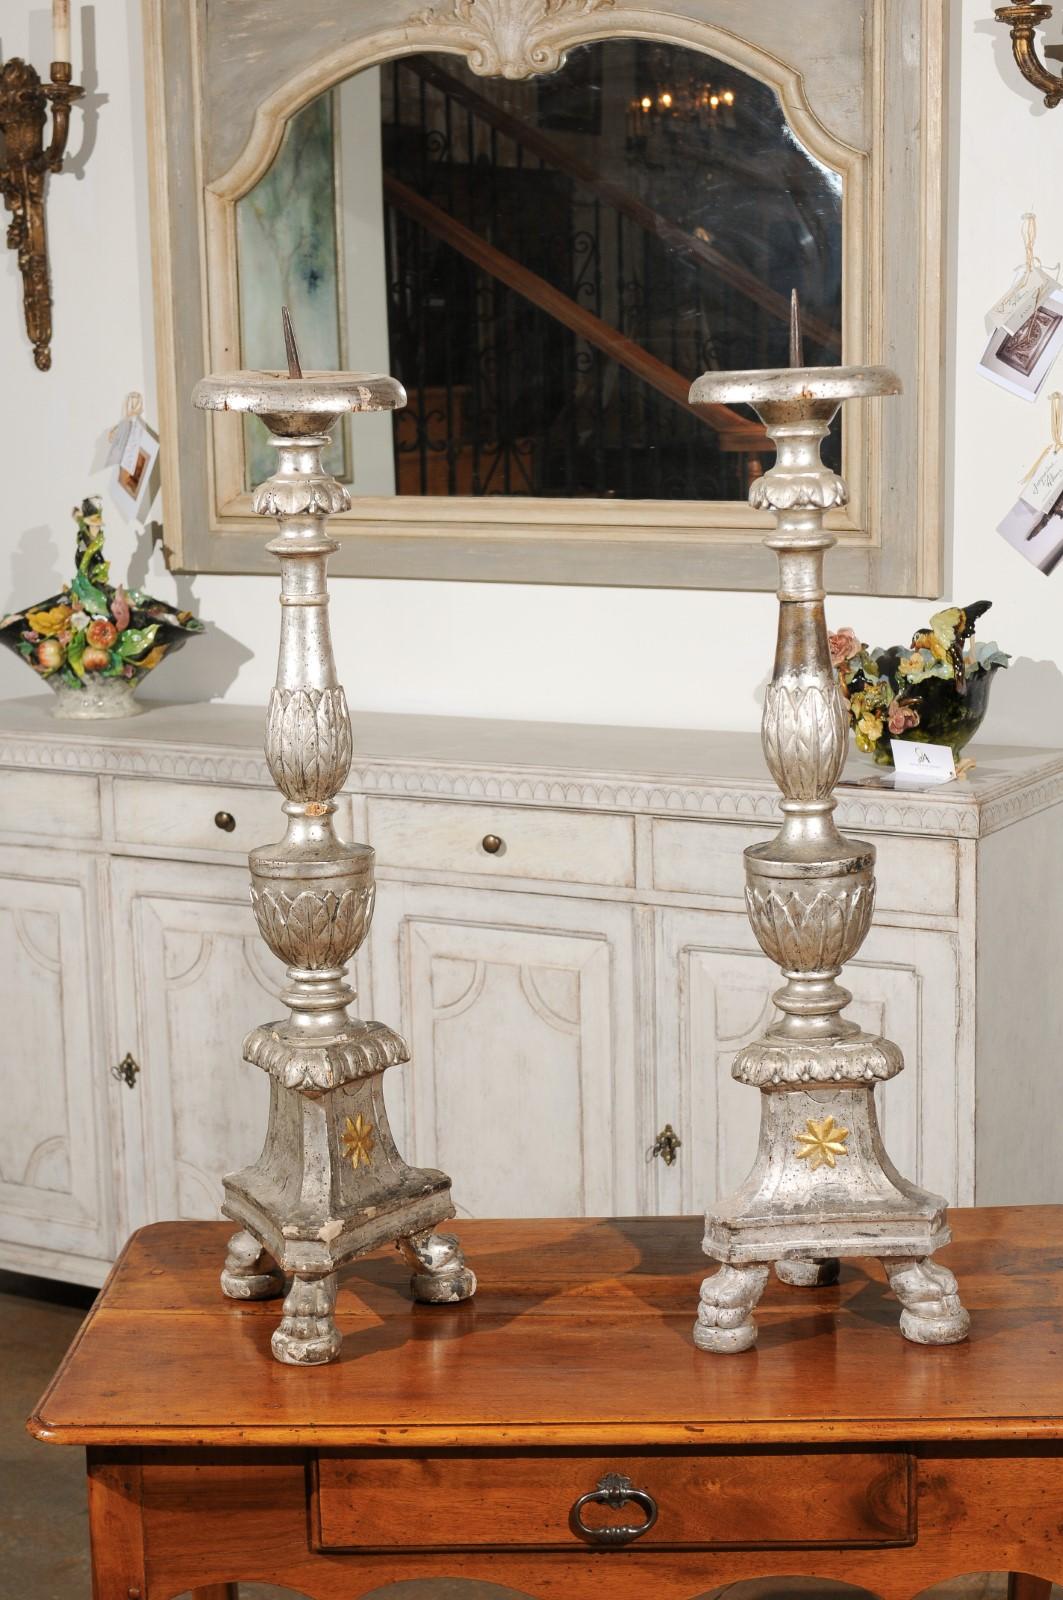 A pair of Italian 18th century tall silver gilt candlesticks prickets with waterleaf motifs and gold gilt star. Born in Italy during the 18th century, each of this exquisite pair of silver gilt candlesticks features a hand carved stem, adorned with